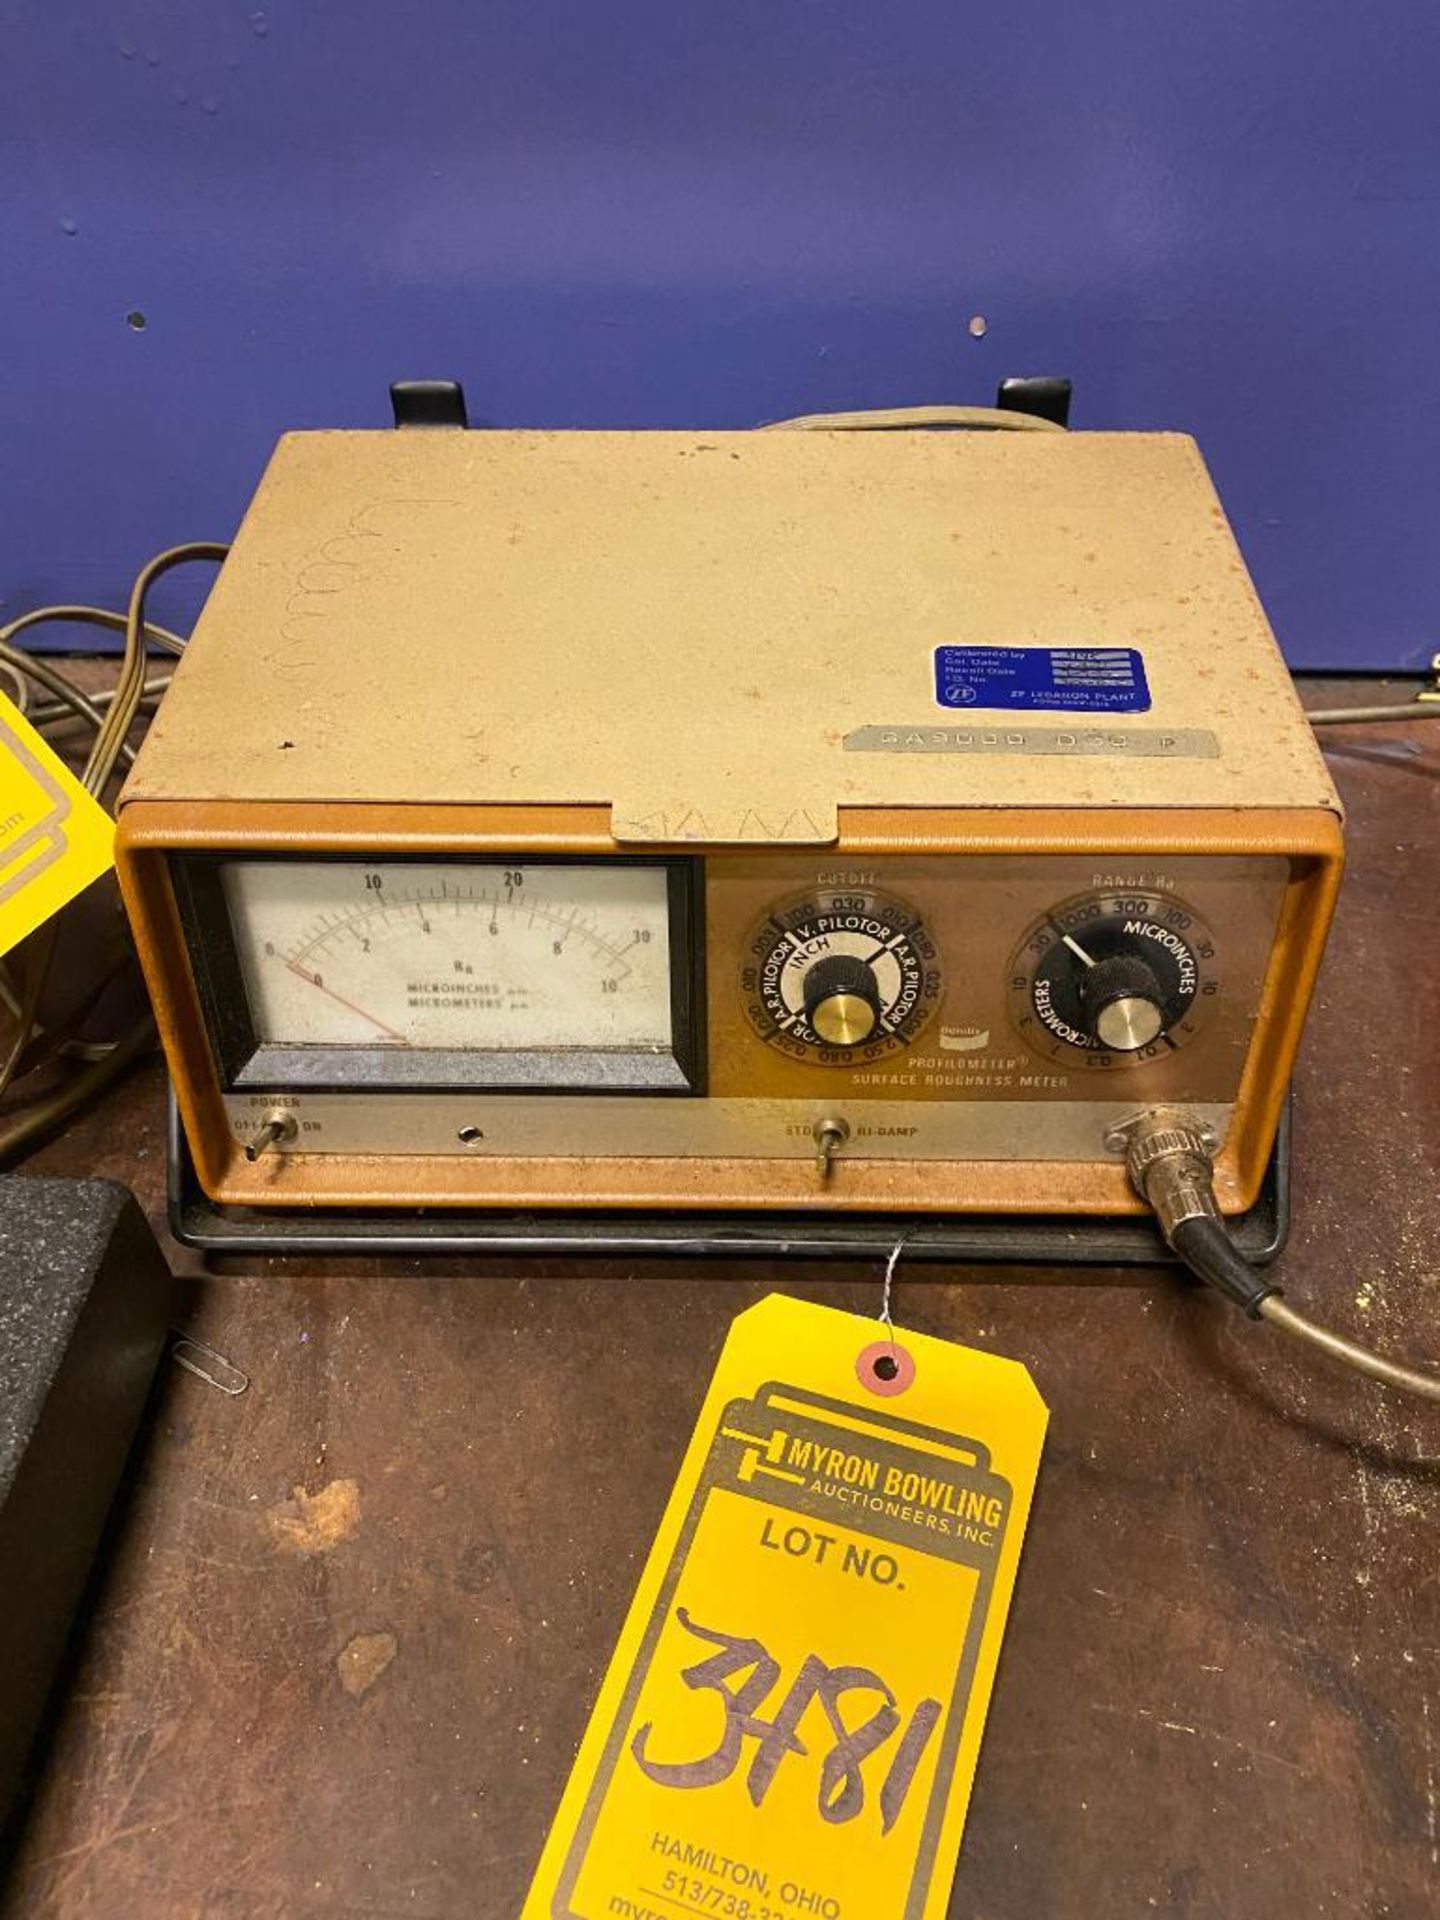 Bendix Profilometer Surface Roughness Tester, Type AD, Model 27 - Image 2 of 2